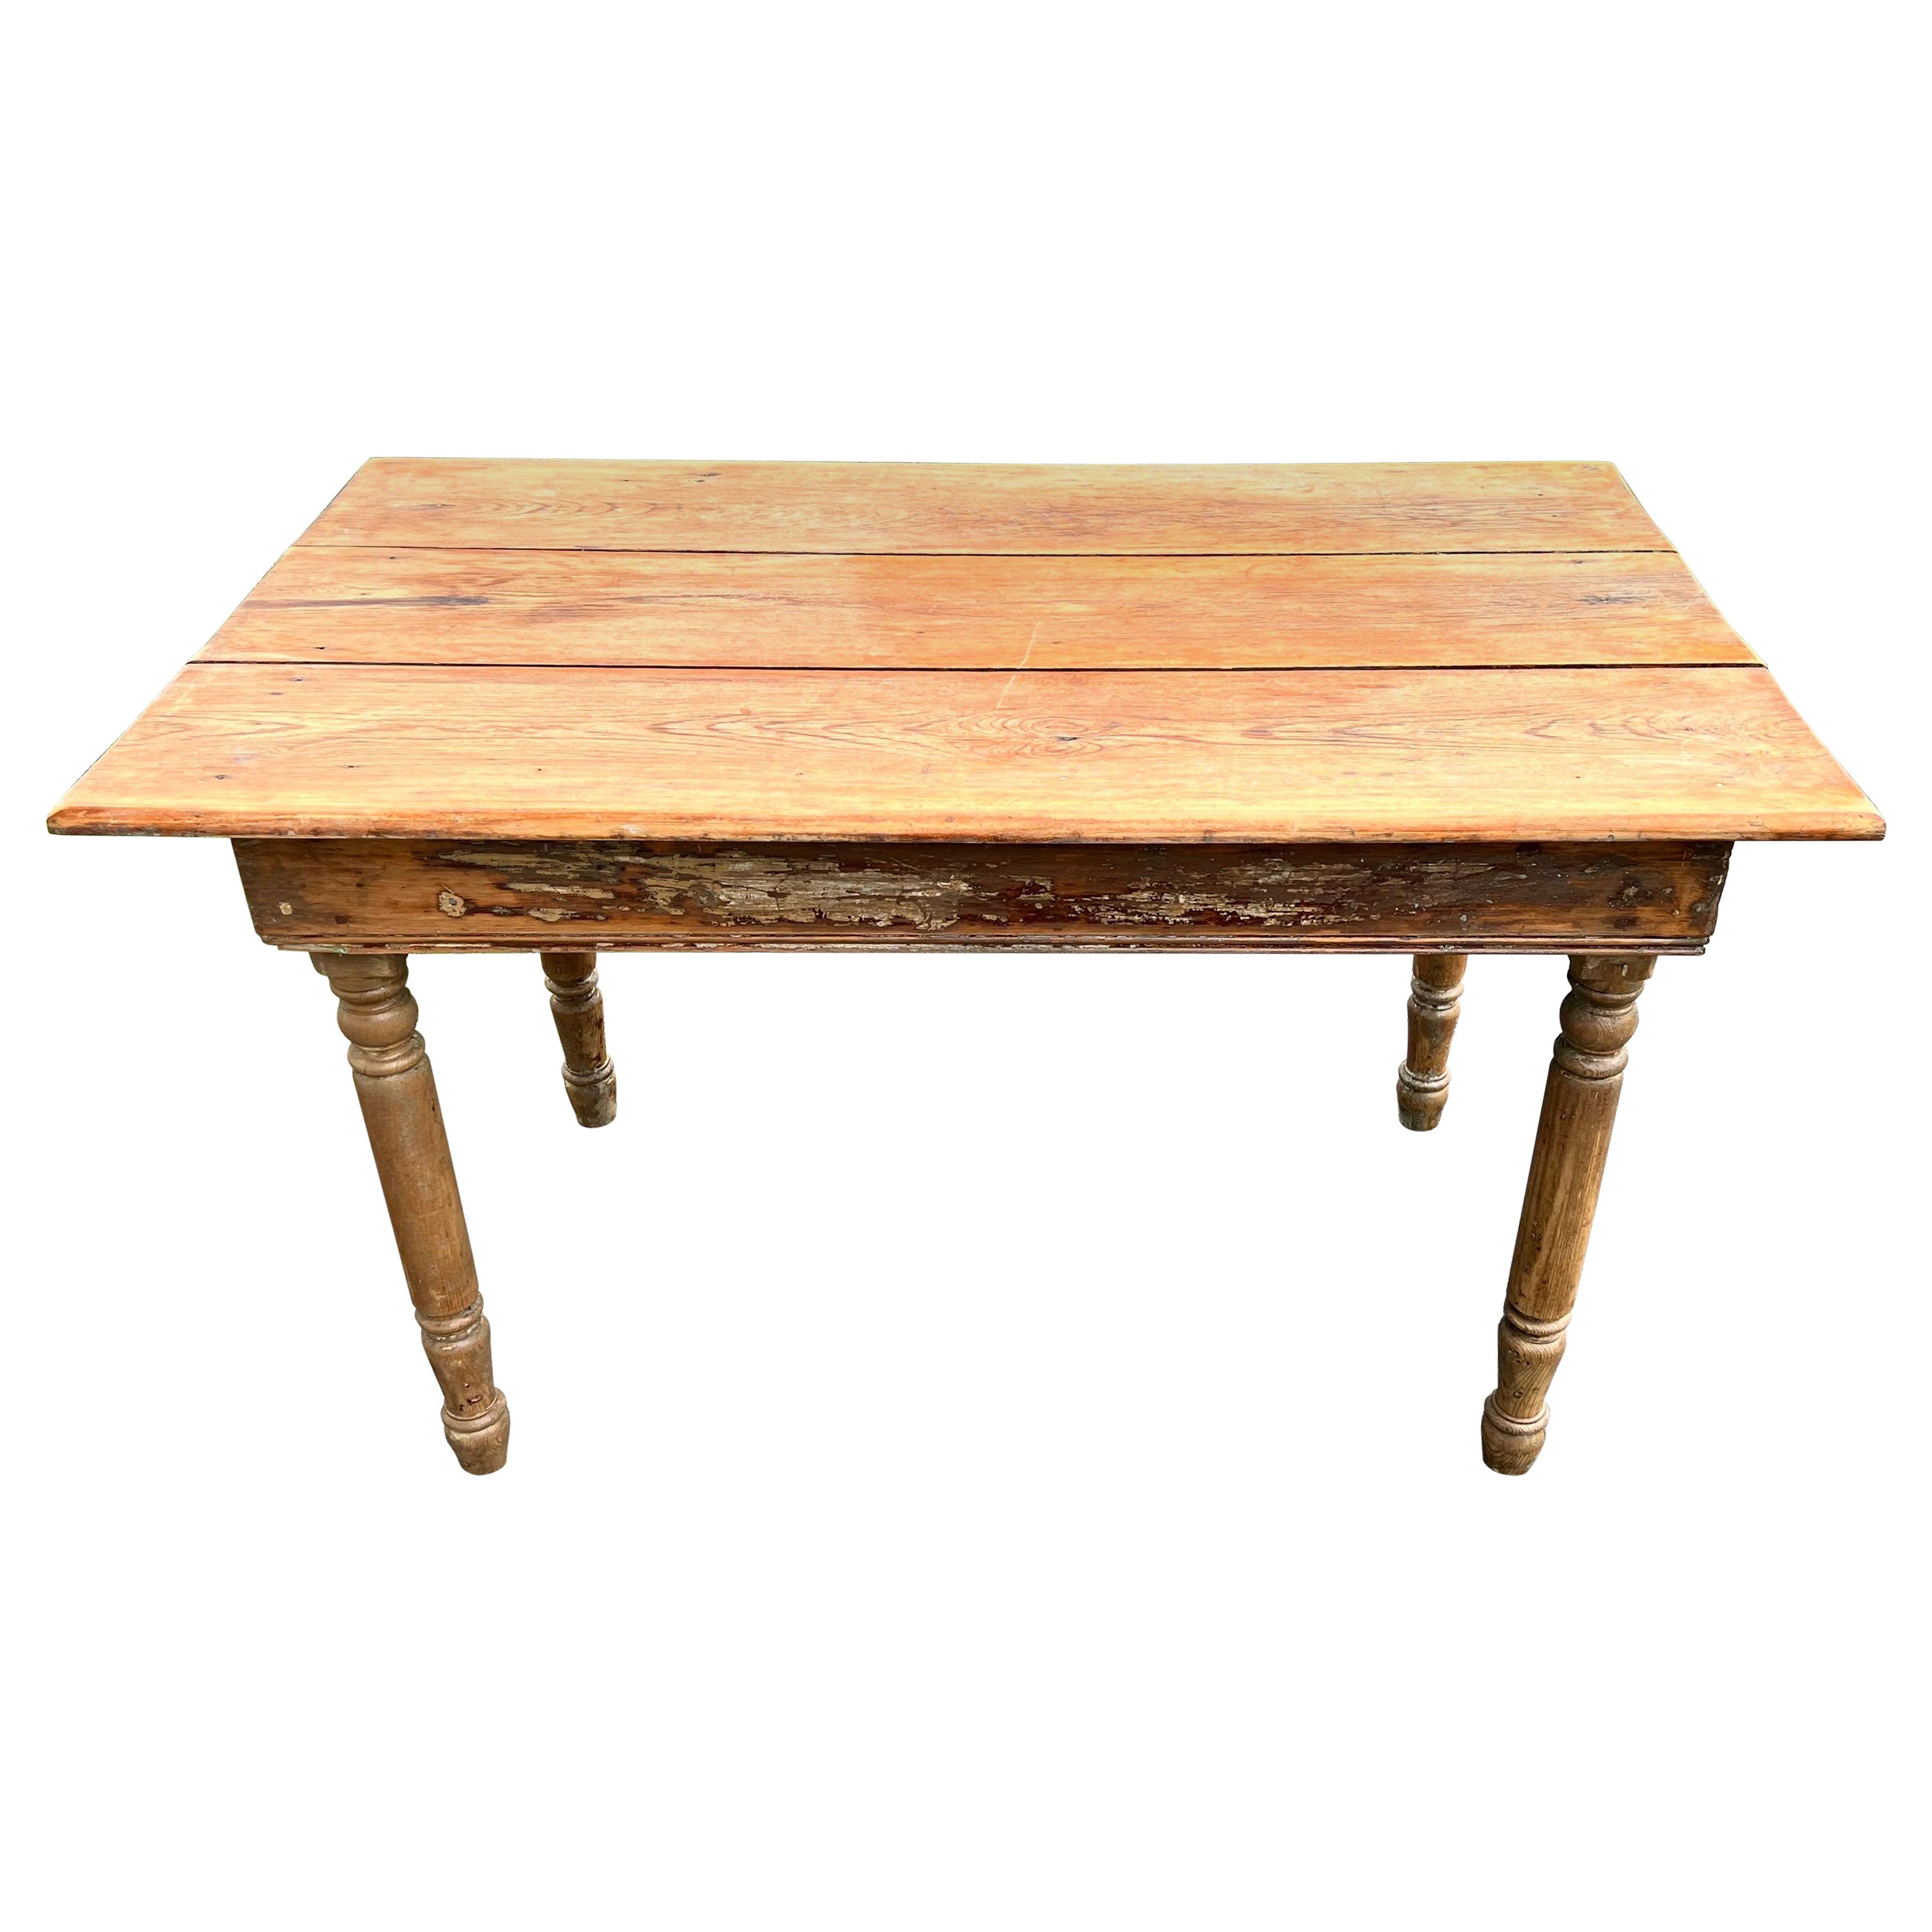 Late 19th Century Antique Pine Farmhouse Table For Sale